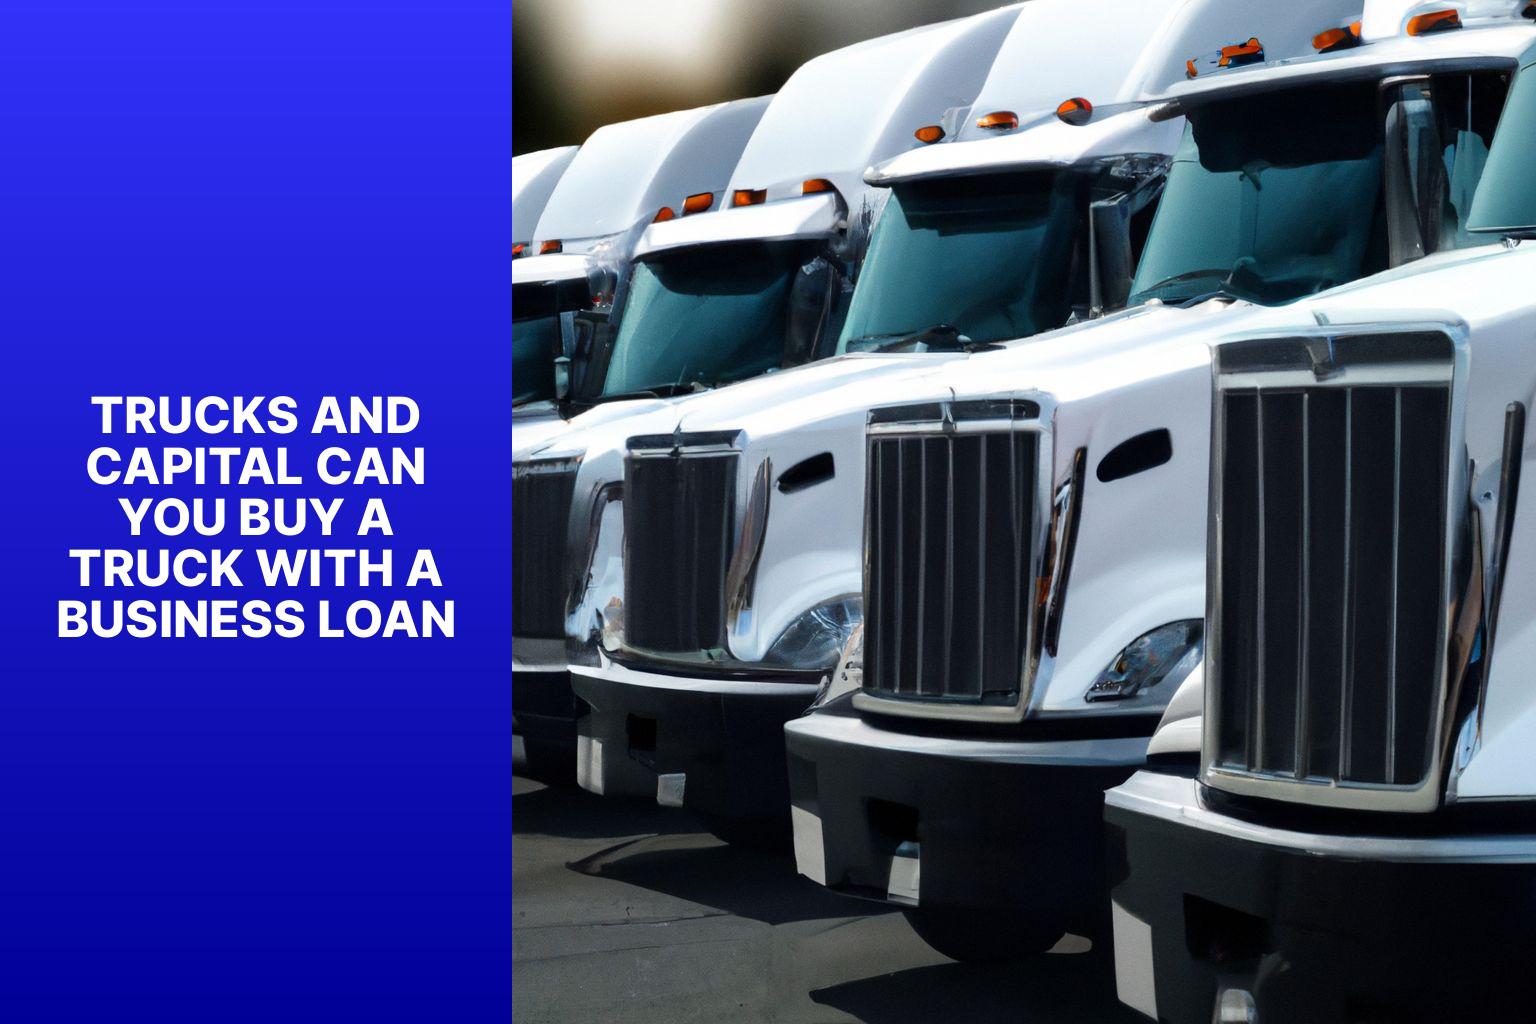 Trucks and Capital Can You Buy a Truck with a Business Loan